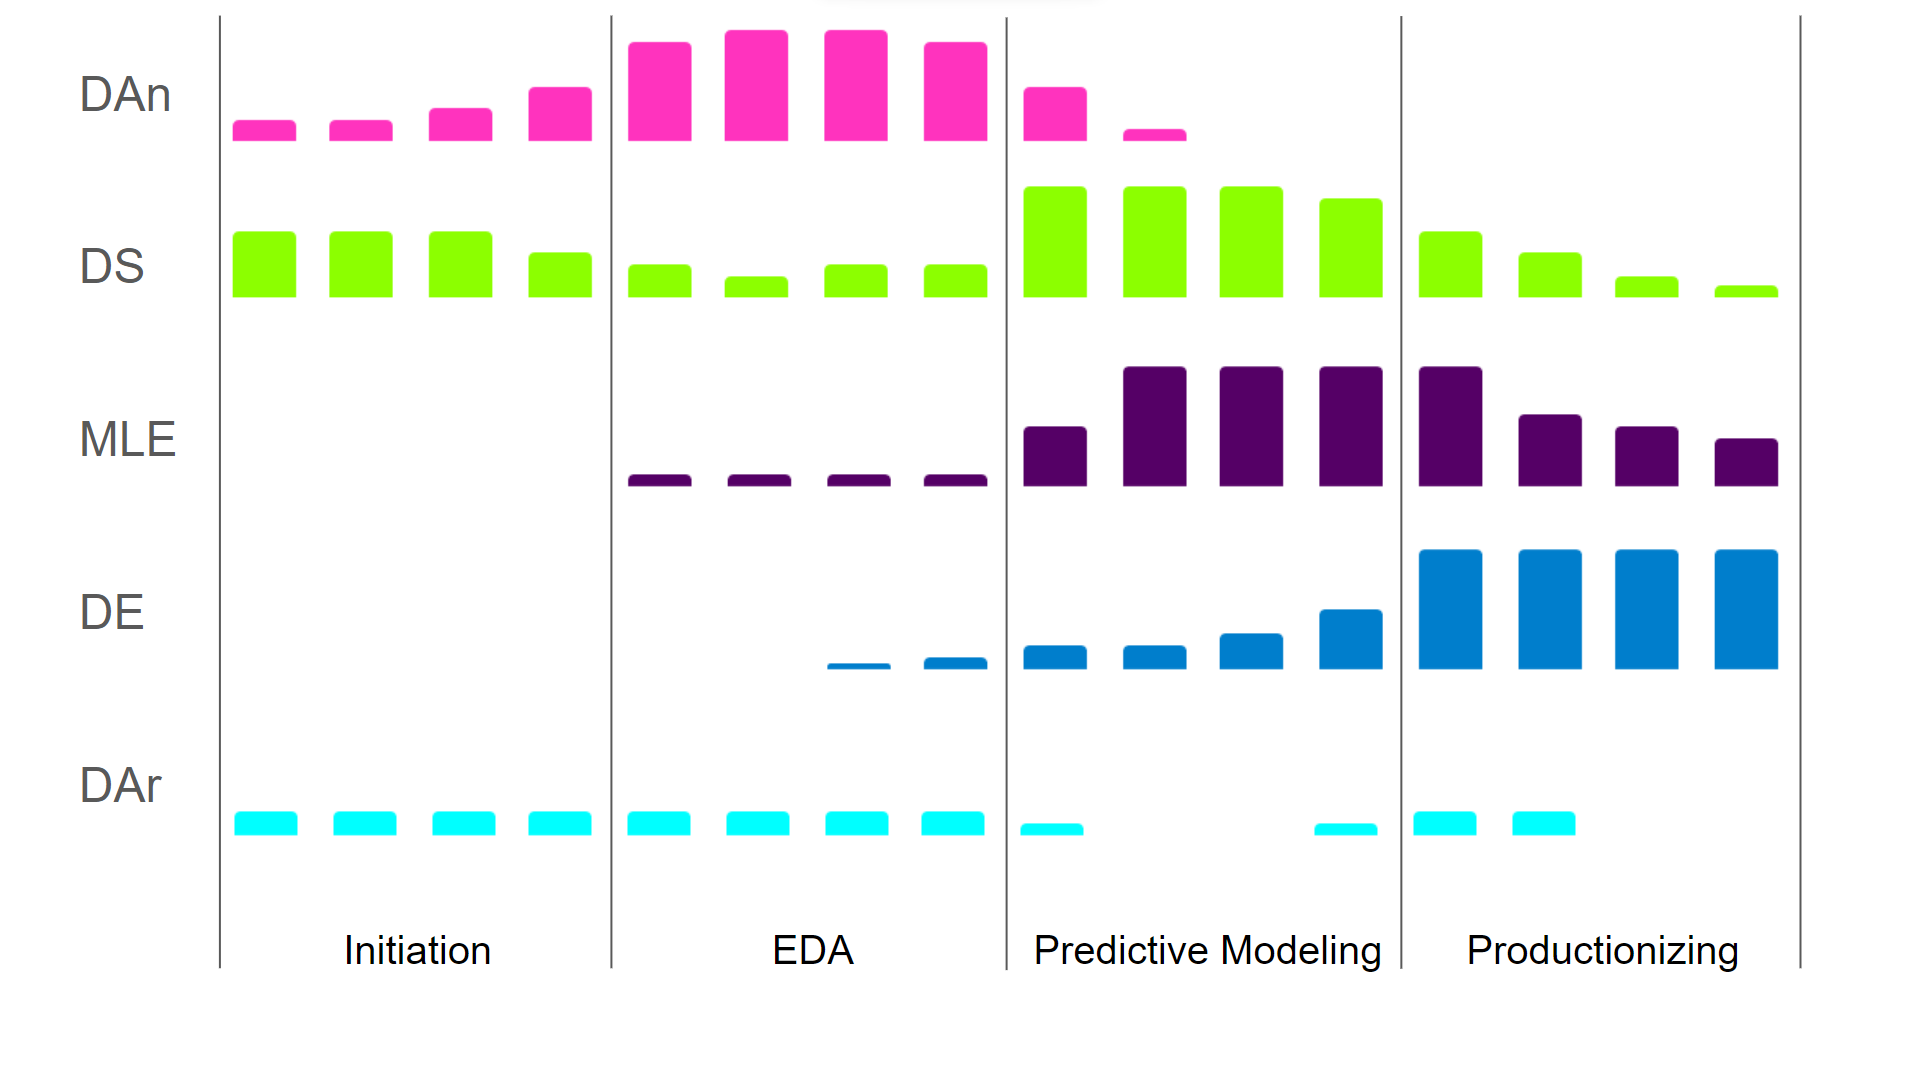 The level of contribution of the different Data Science Roles throughout a Data Science Project (DAn - Data Analyst, DS - Data Scientist, MLE - Machine Learning Engineer, DE - Data Engineer, DAr - Data Architect - Image by Author